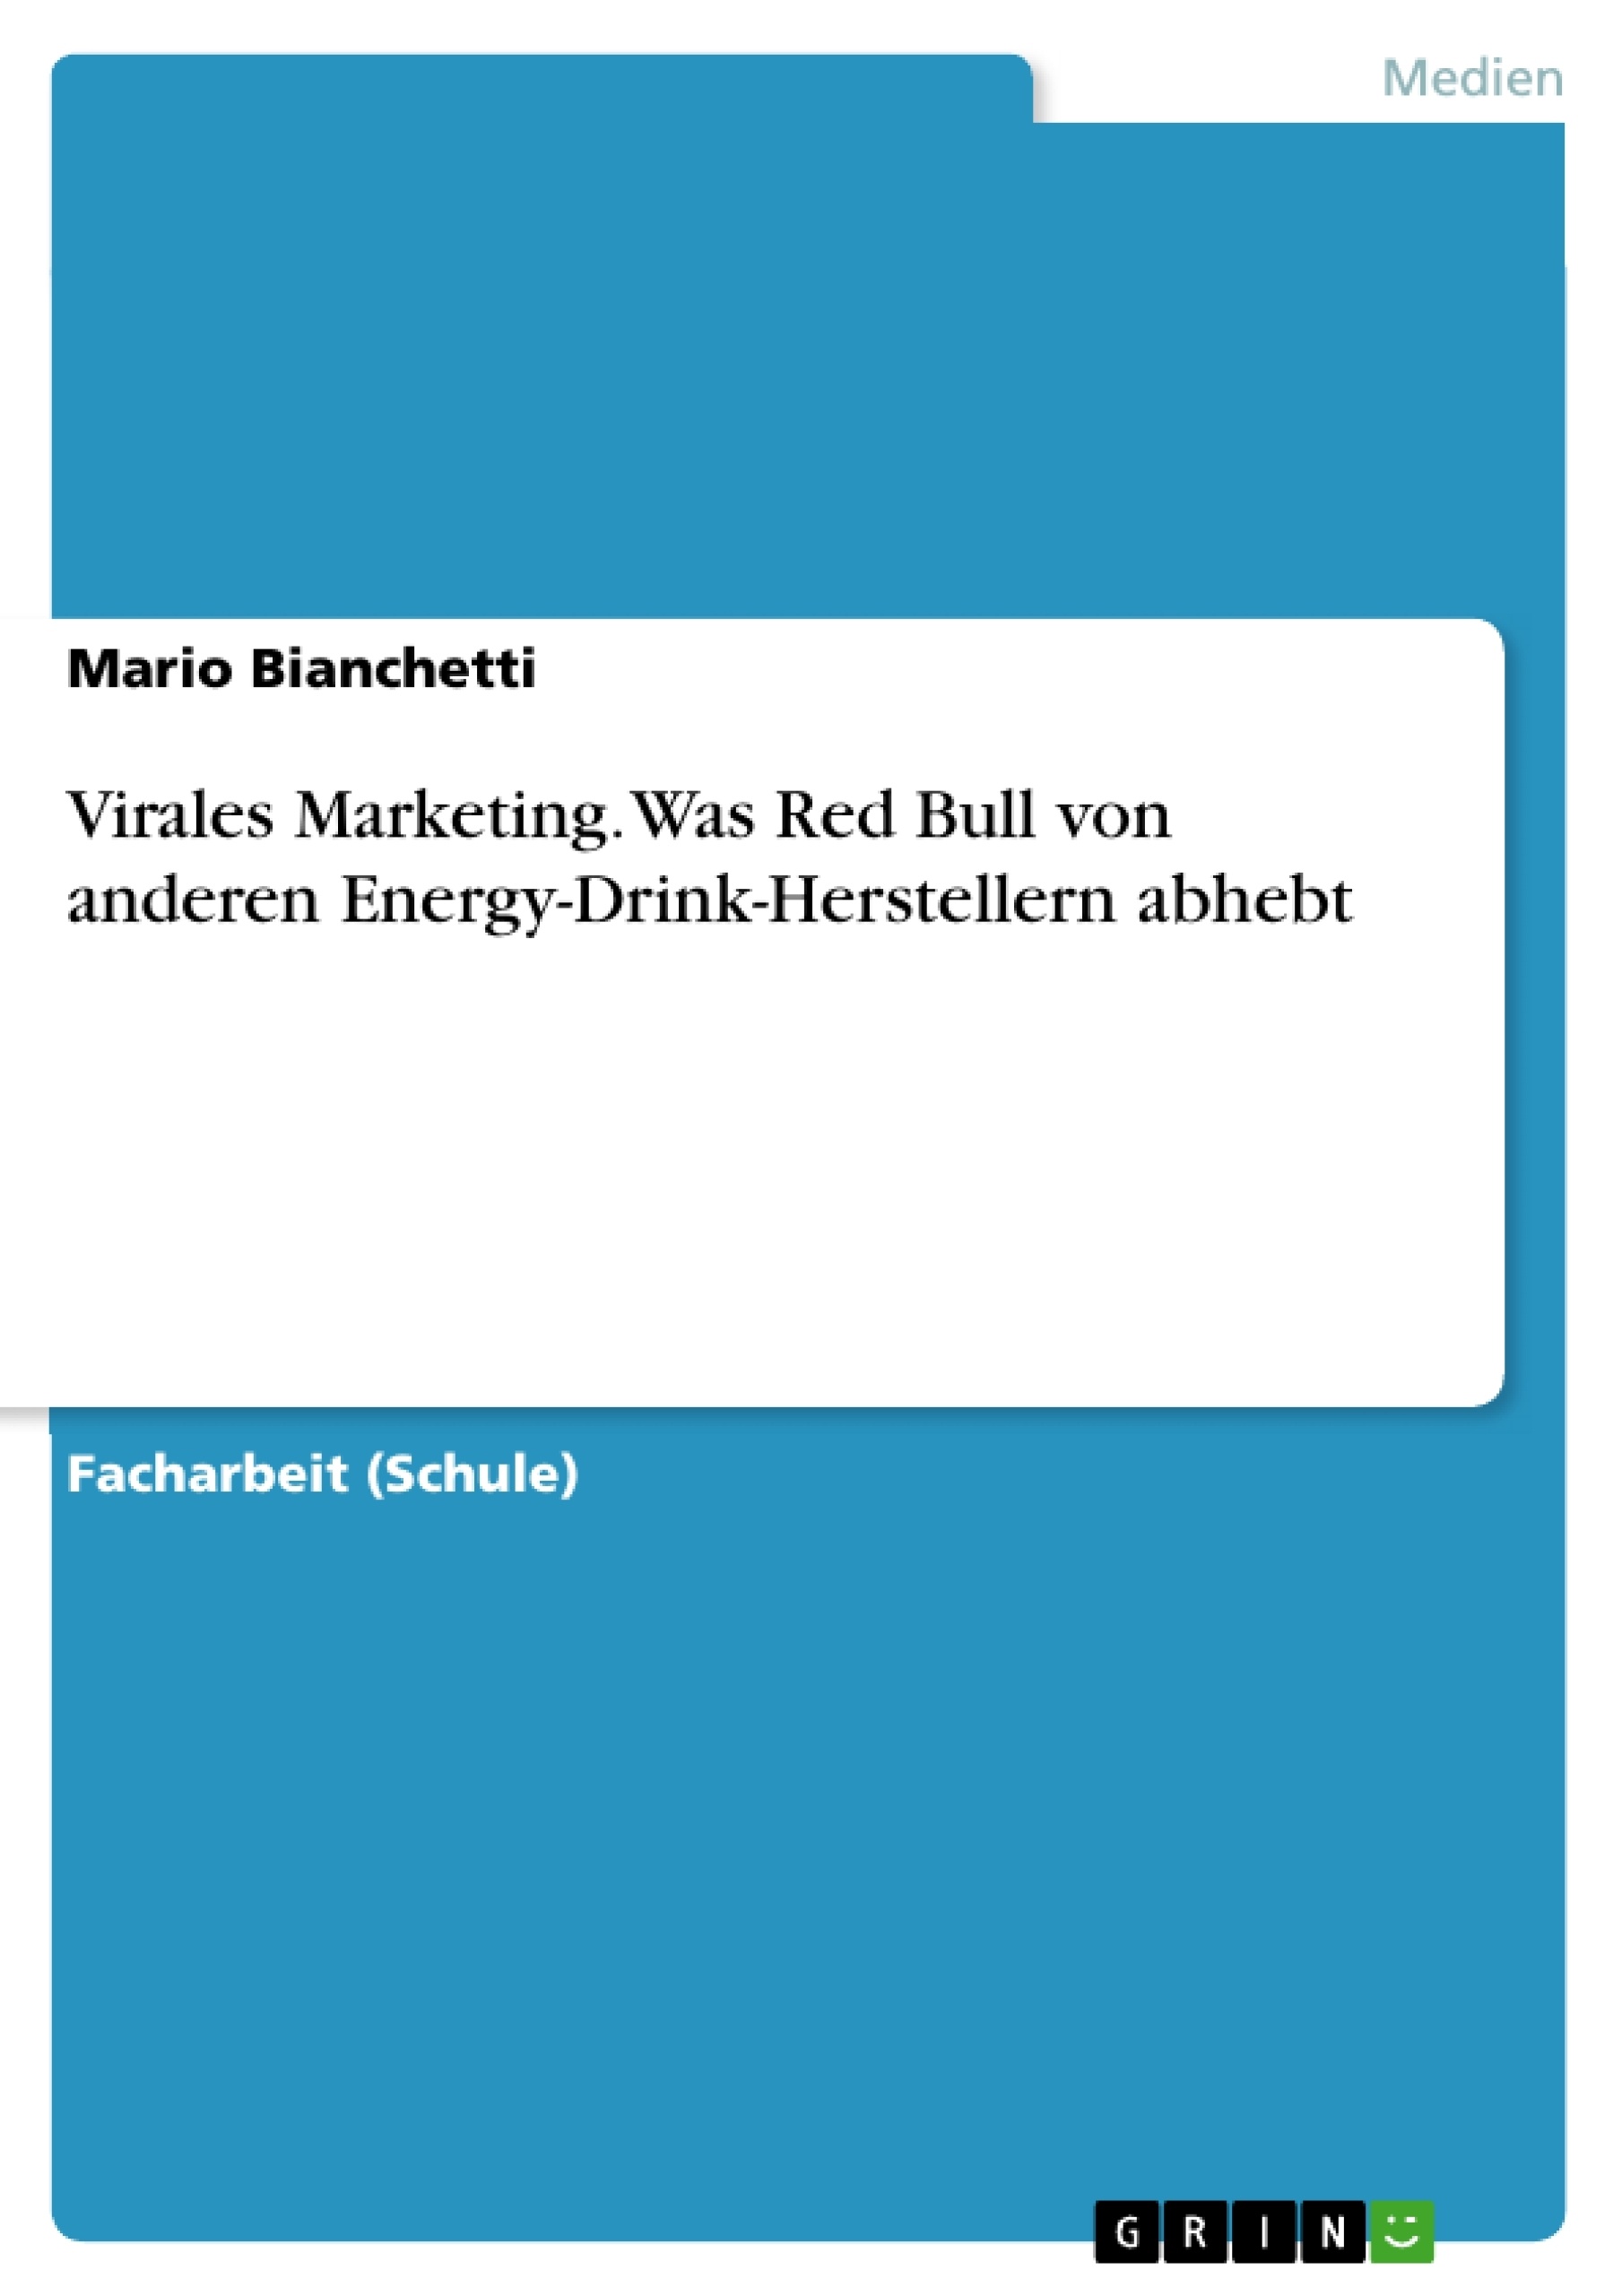 business plan for a fictional energy drink without chemical additives